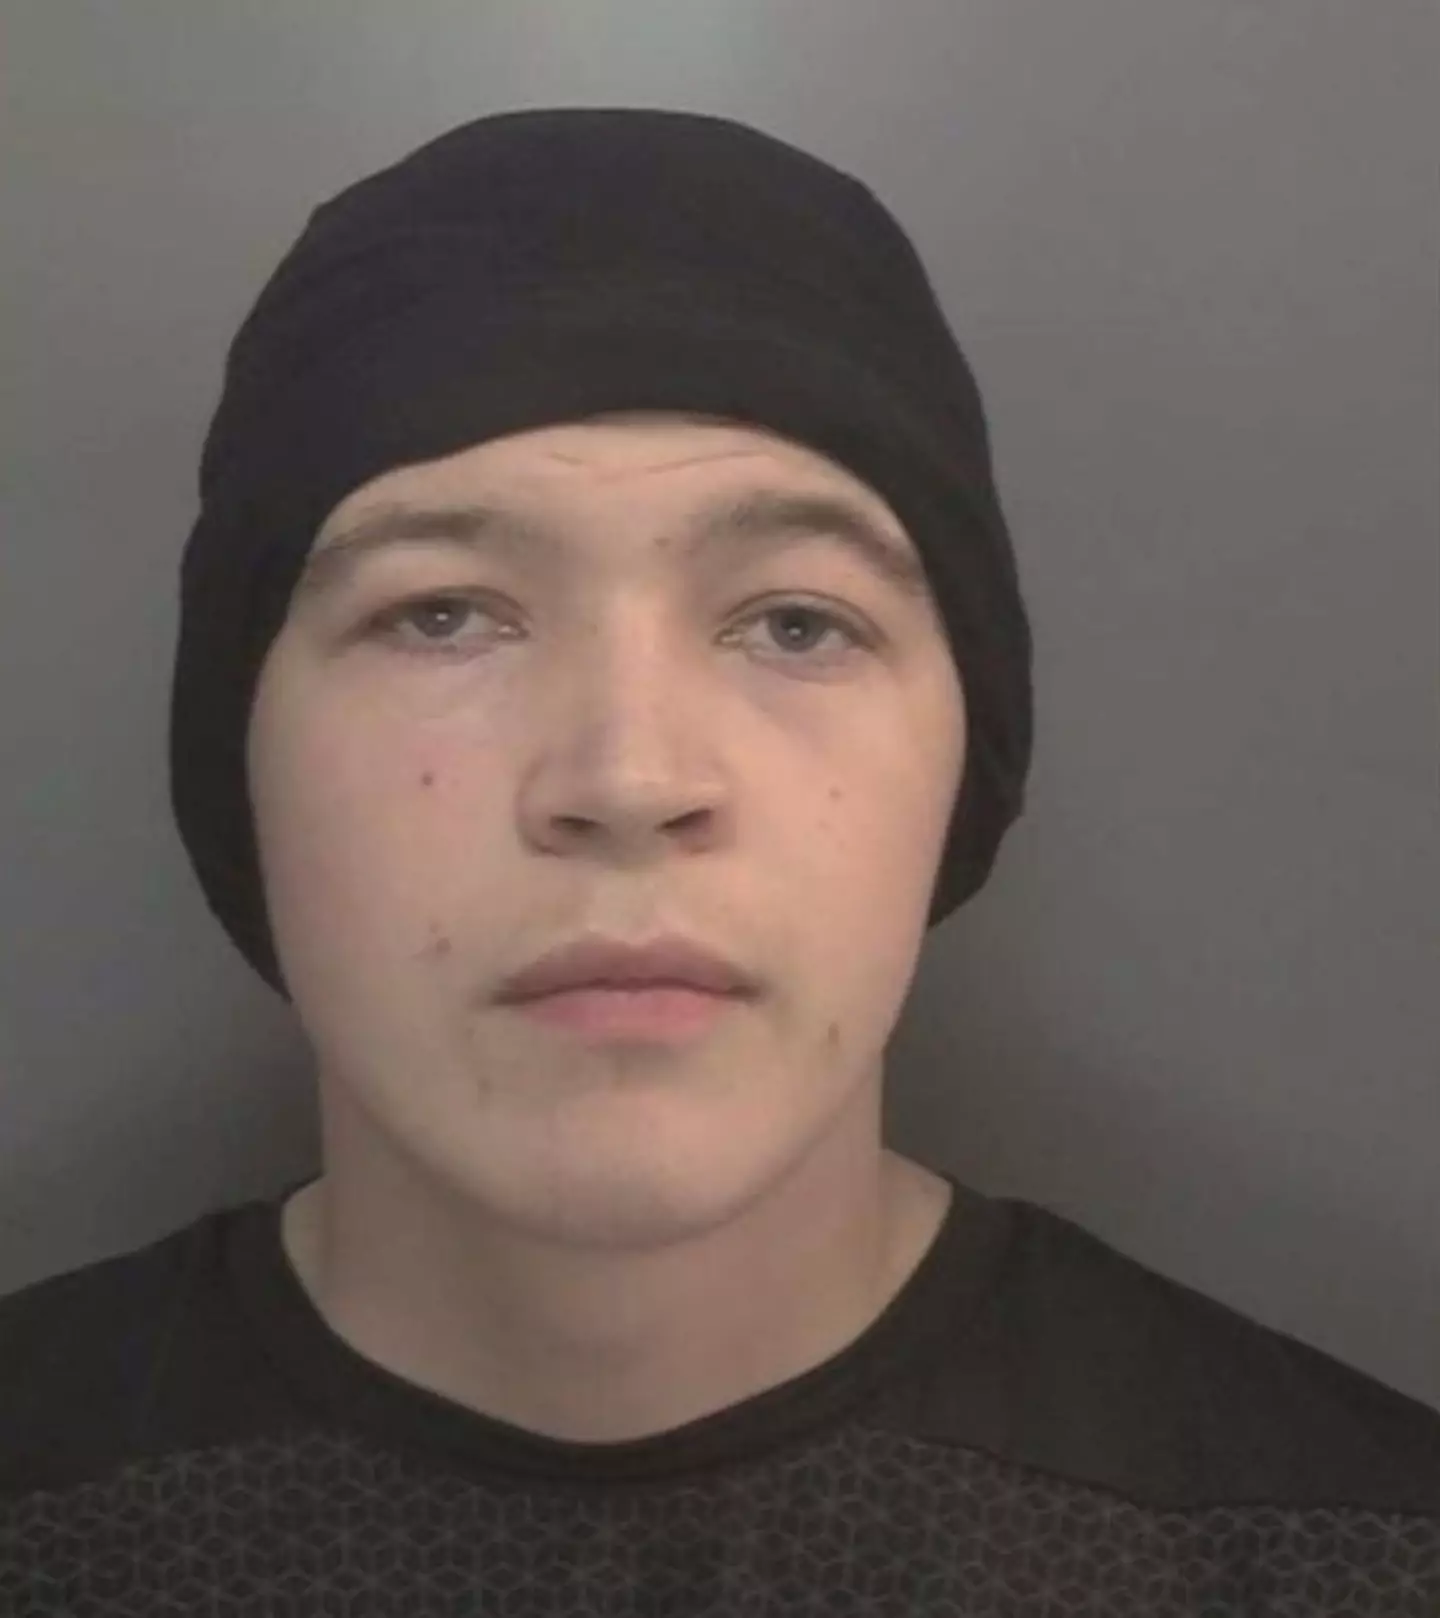 A judge at Liverpool crown court has now jailed the now 18-year-old for two and a half years.